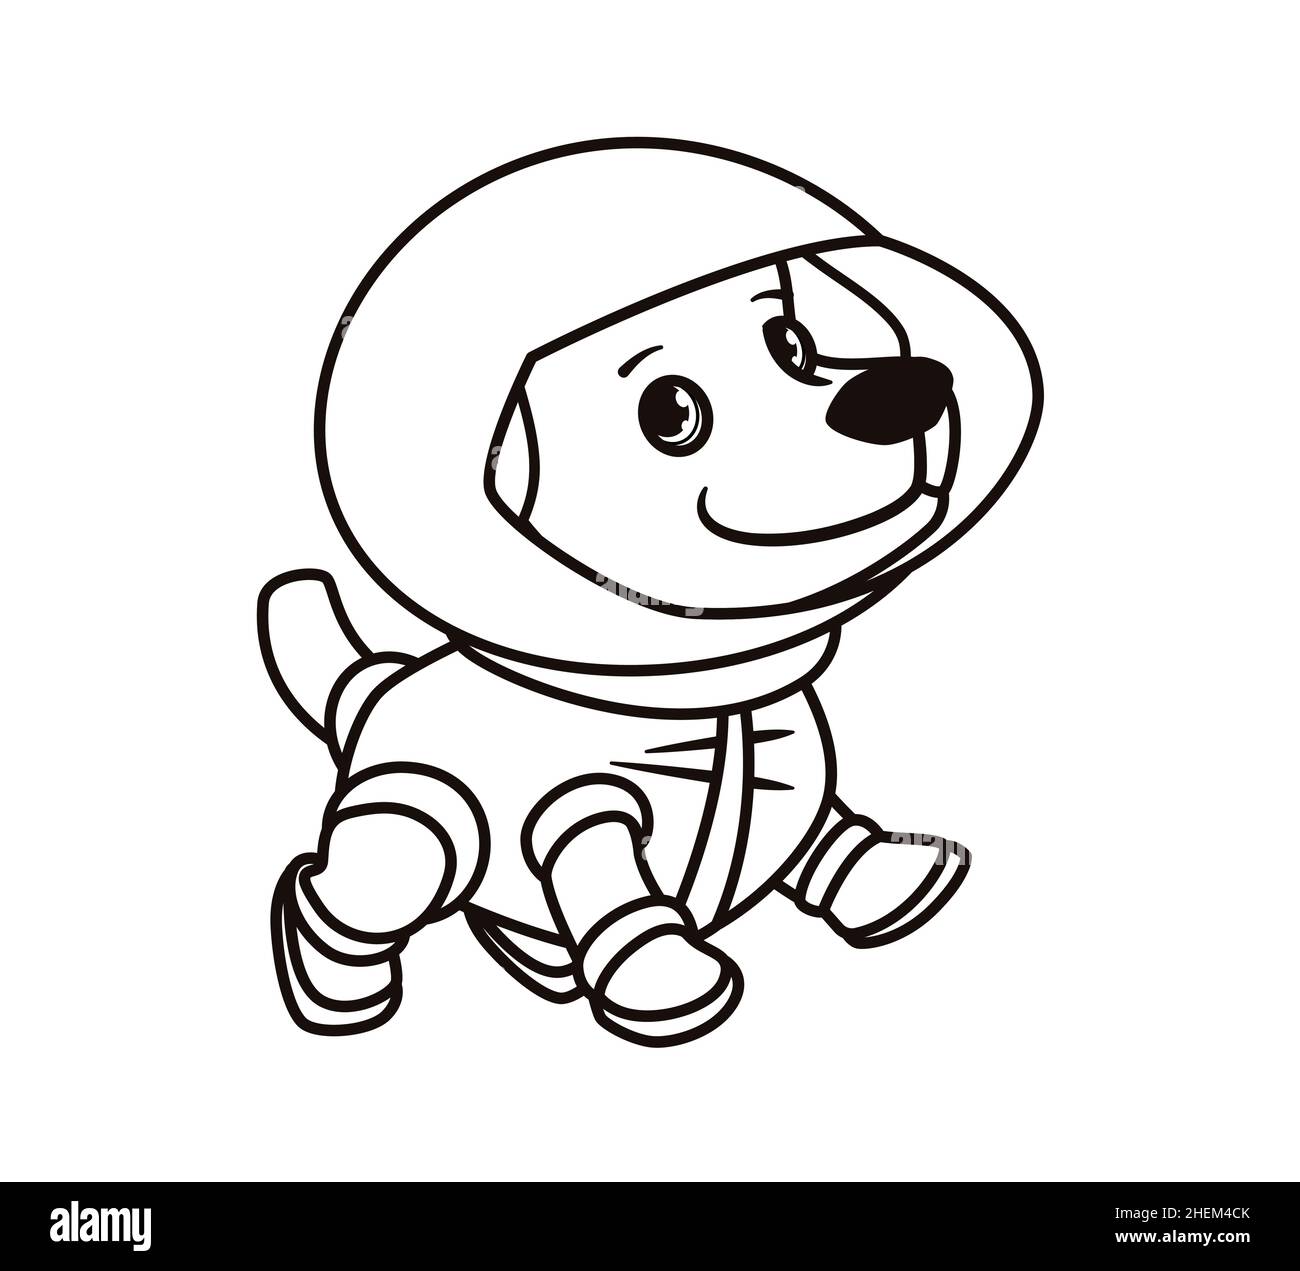 Coloring book: cute astronaut dog in space suit. Isolated vector illustration on white background in cartoon flat style, sticker. Stock Vector